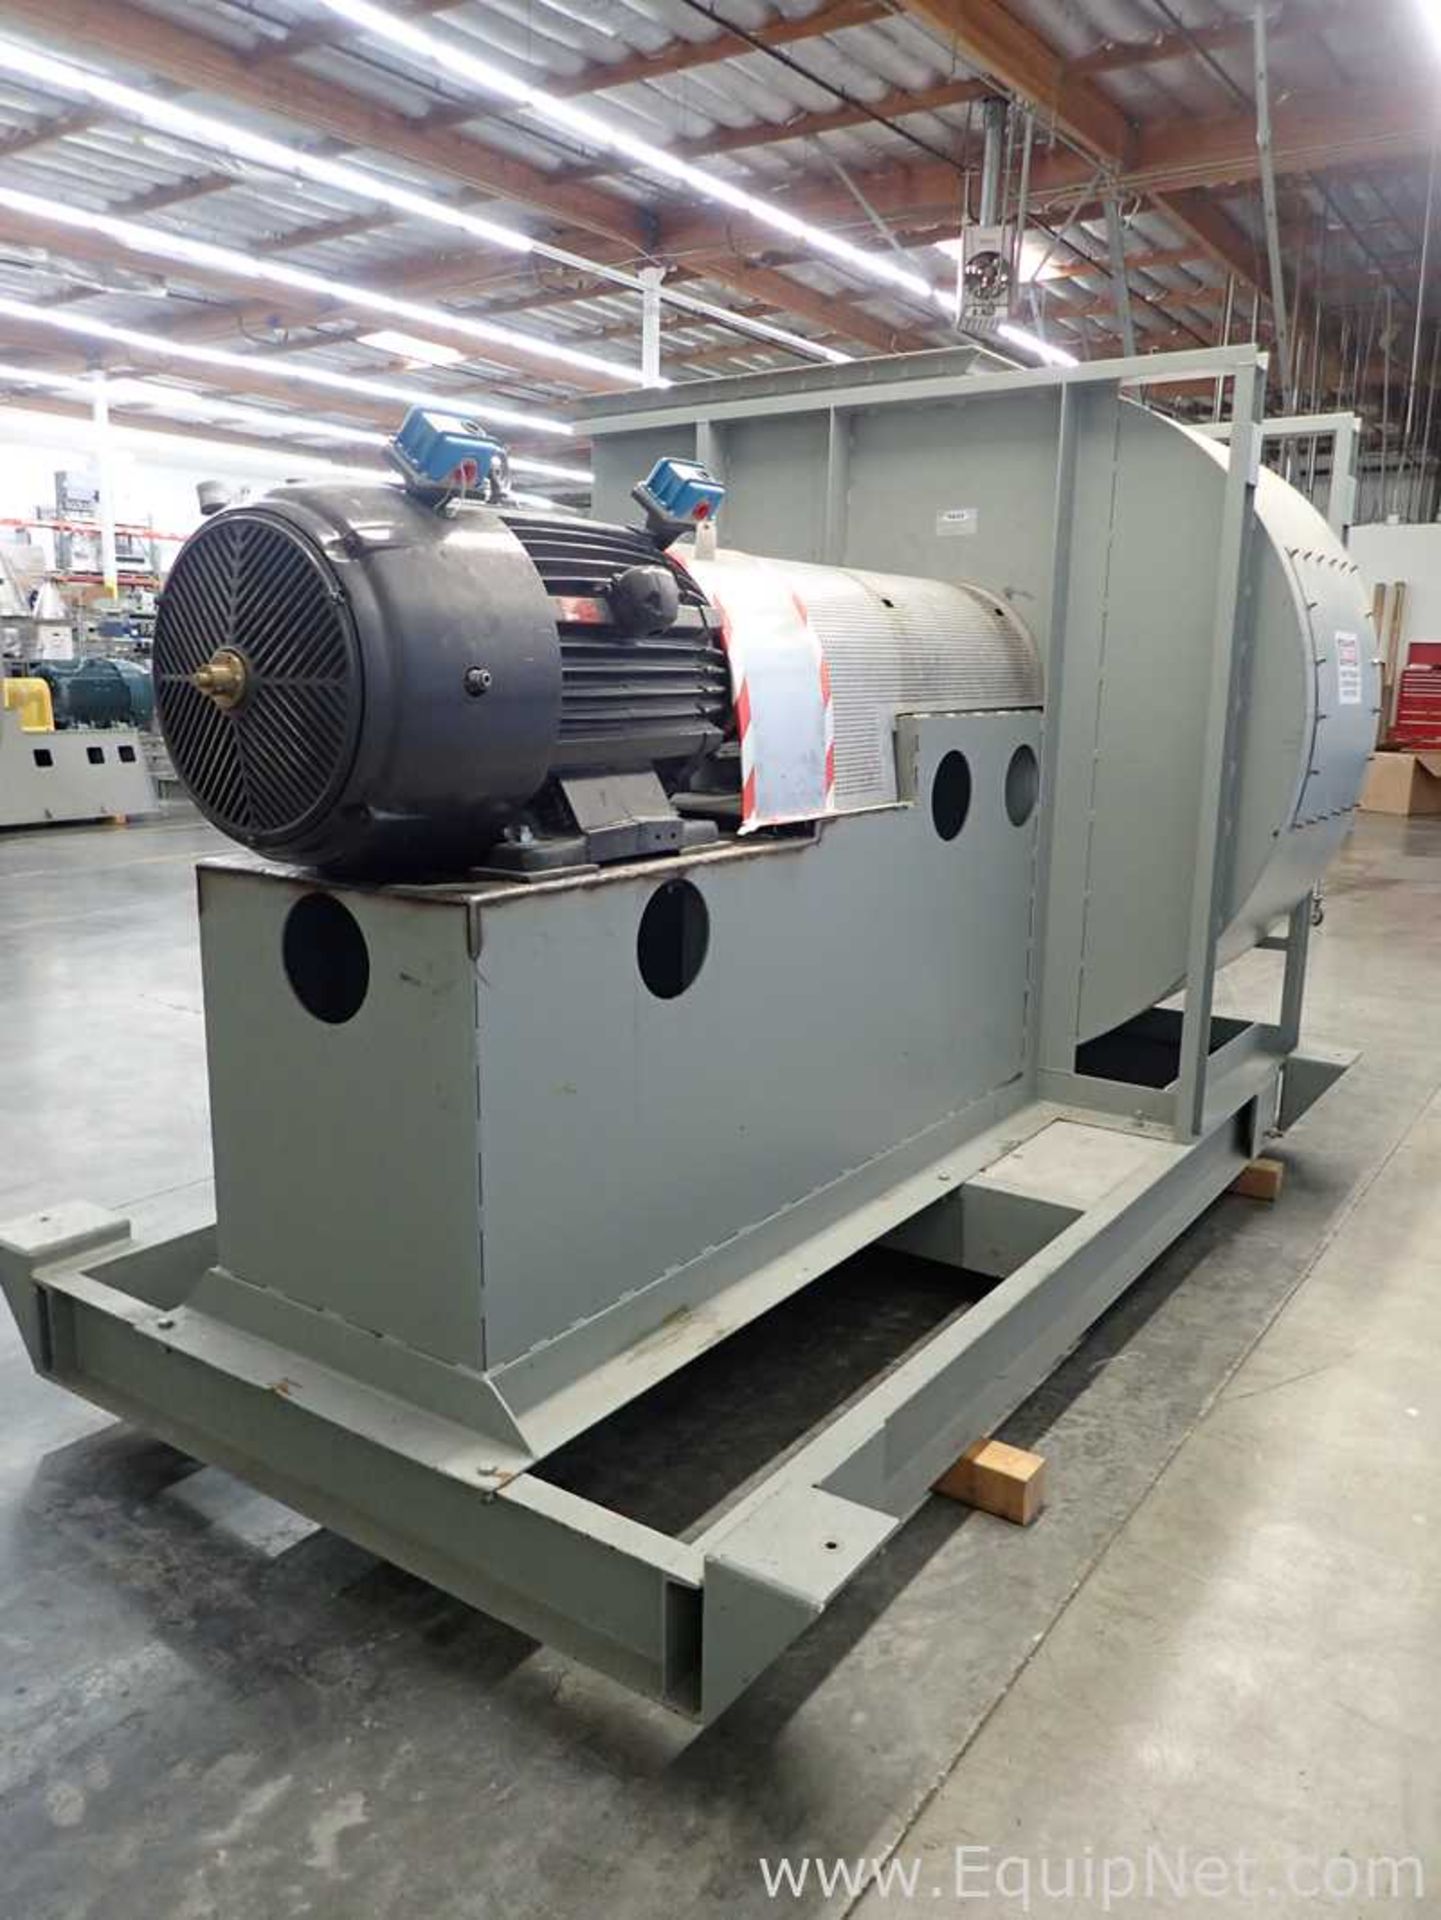 Pace Company CL 44ARRG8 General Air Handler Fan and Motor - Image 12 of 47